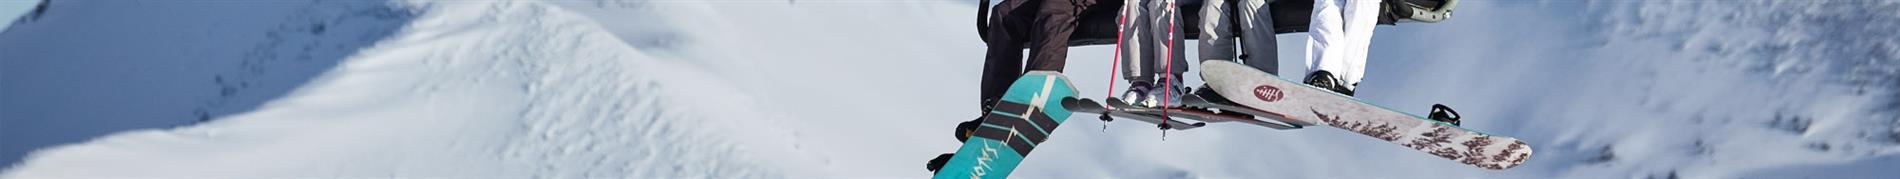 Roxy Women's skis, snowboards, and accessories for everything snow. 